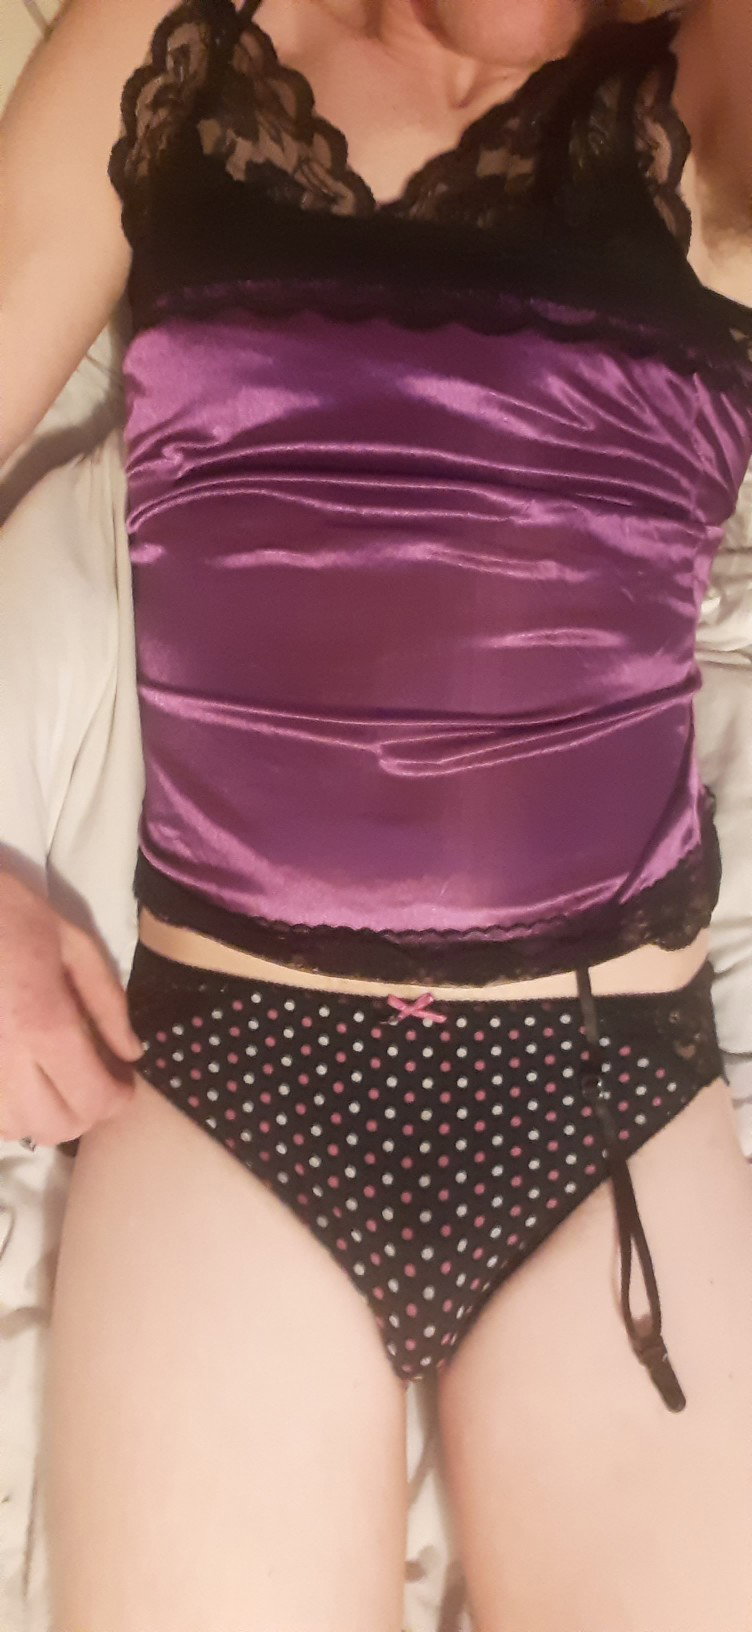 Photo by Sammisissy with the username @Sammisissy,  June 20, 2020 at 10:13 PM. The post is about the topic Crossdressers